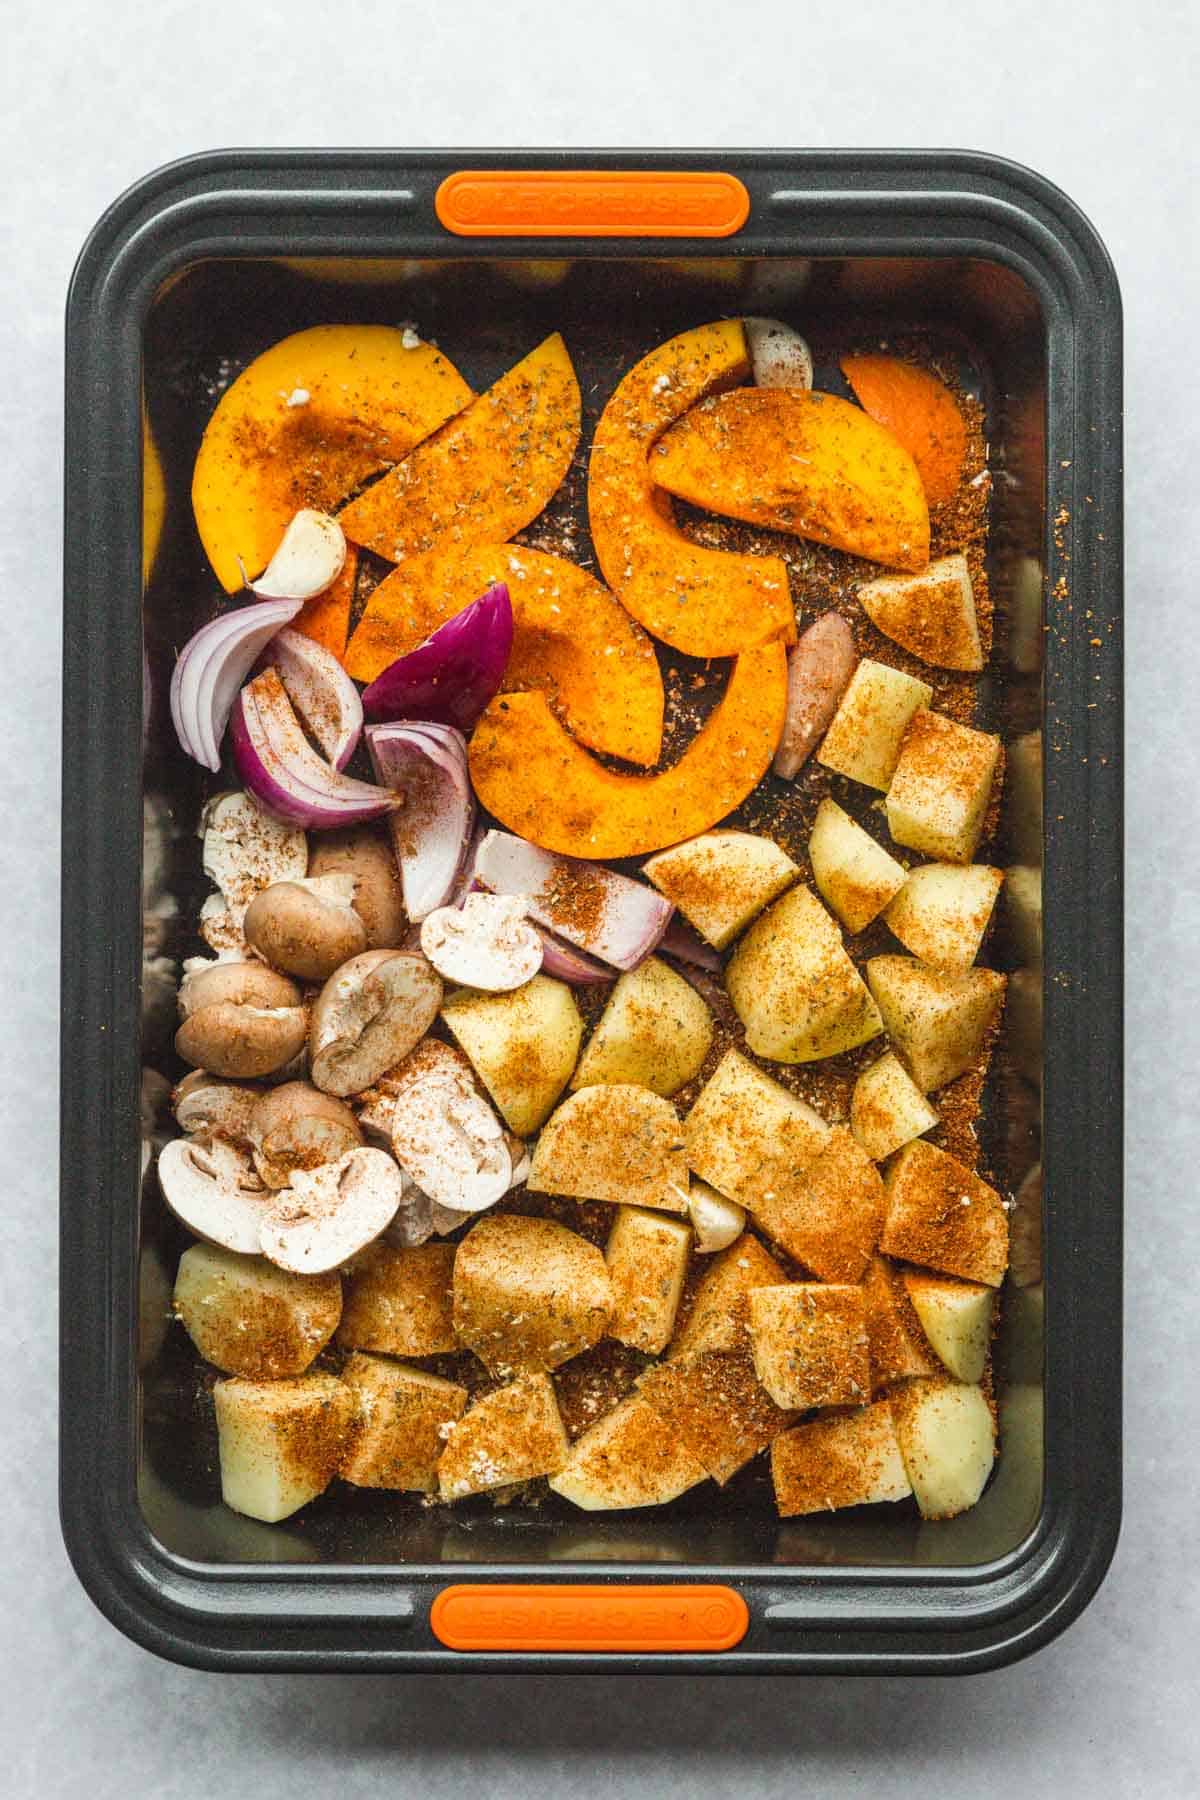 Chopped veggies in a roasting tin with seasonings and olive oil